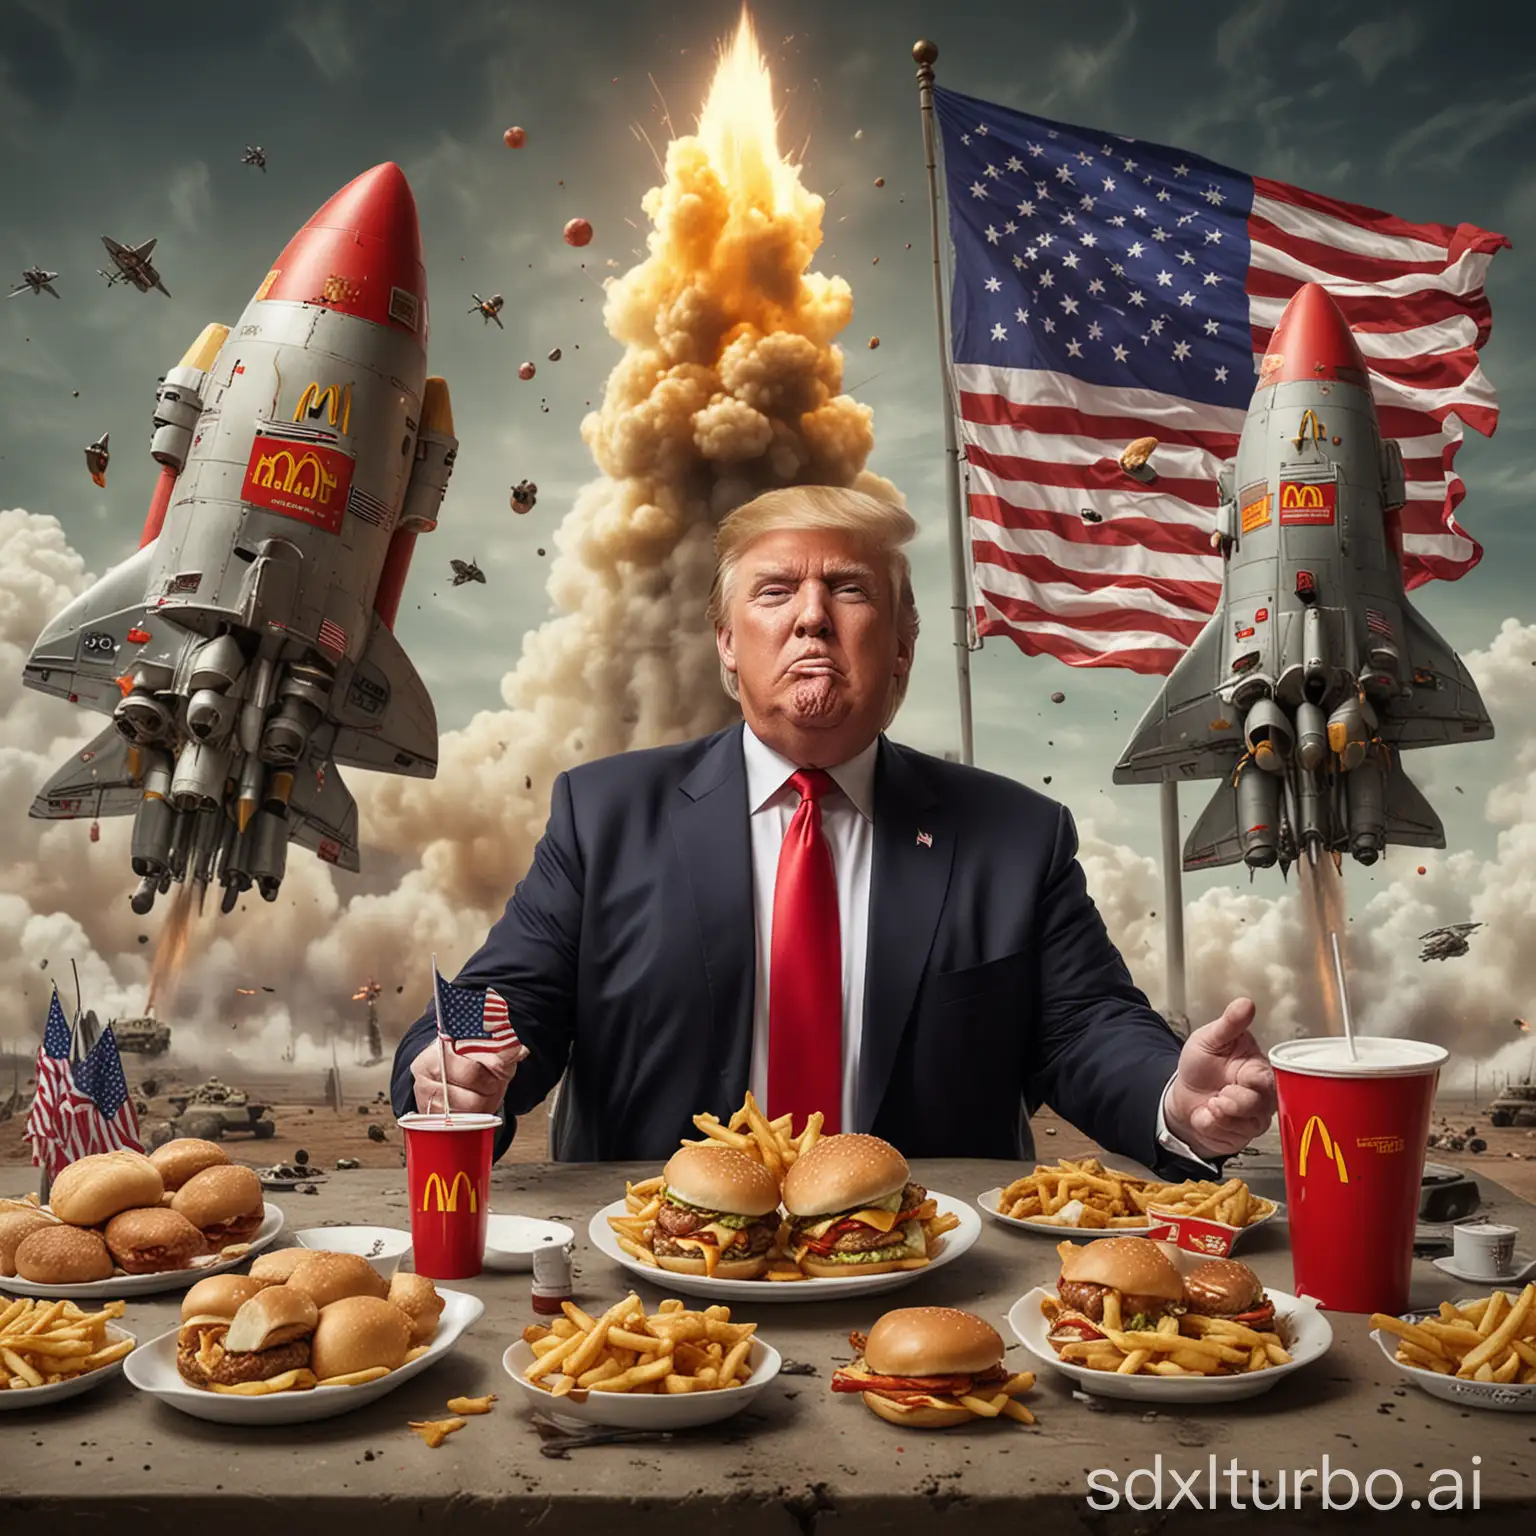 realistic image of donald trump, fat, eating mcdonalds, with large realistic rockets and nuclear warheads launching behind them, flying overhead, with the American flag as the backdrop